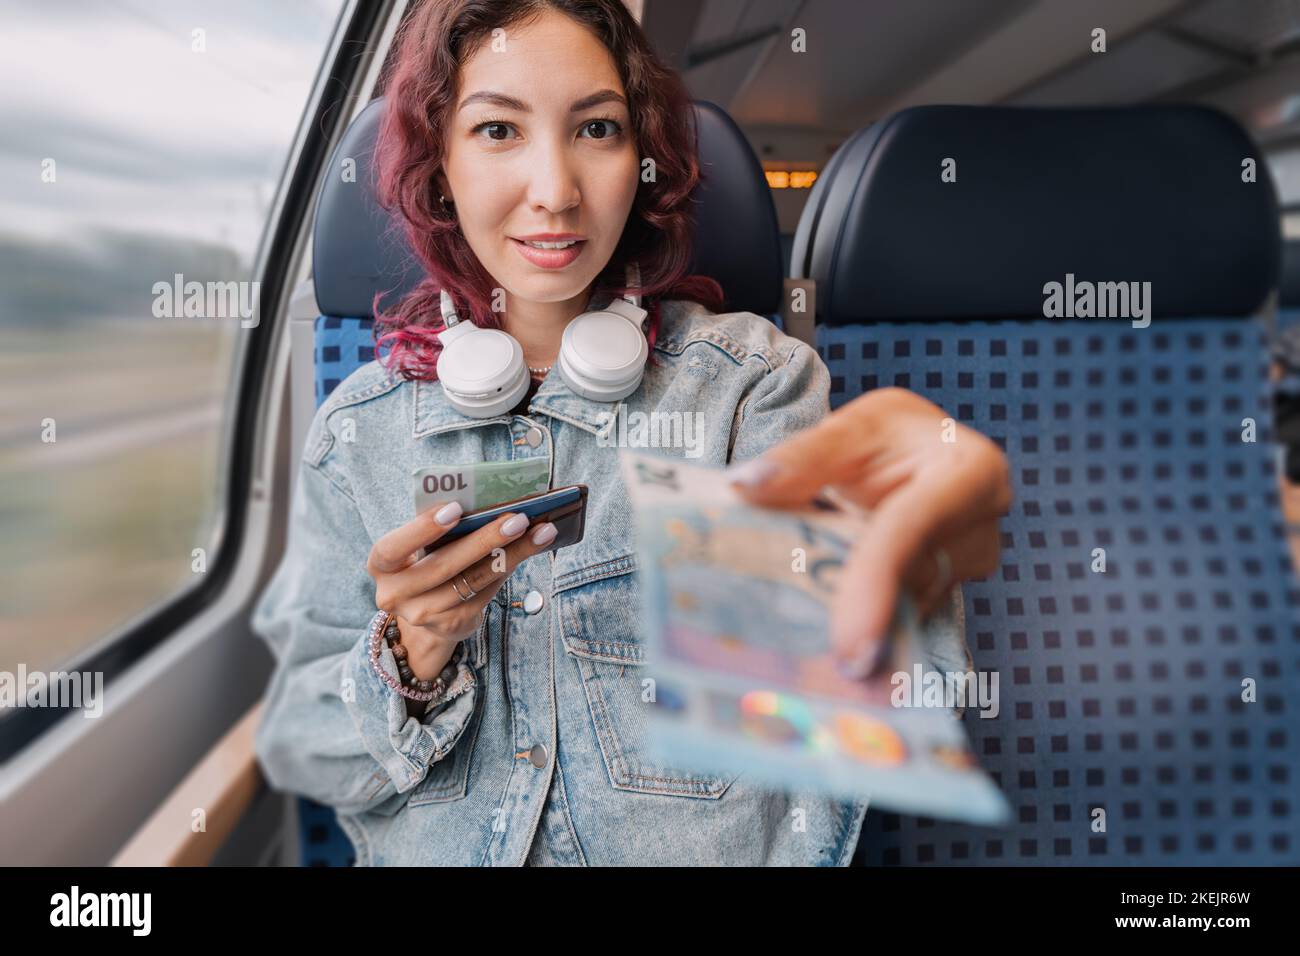 A girl on a public transport train passes euro banknotes to a stranger. The concept of credulity to fraud or scams Stock Photo